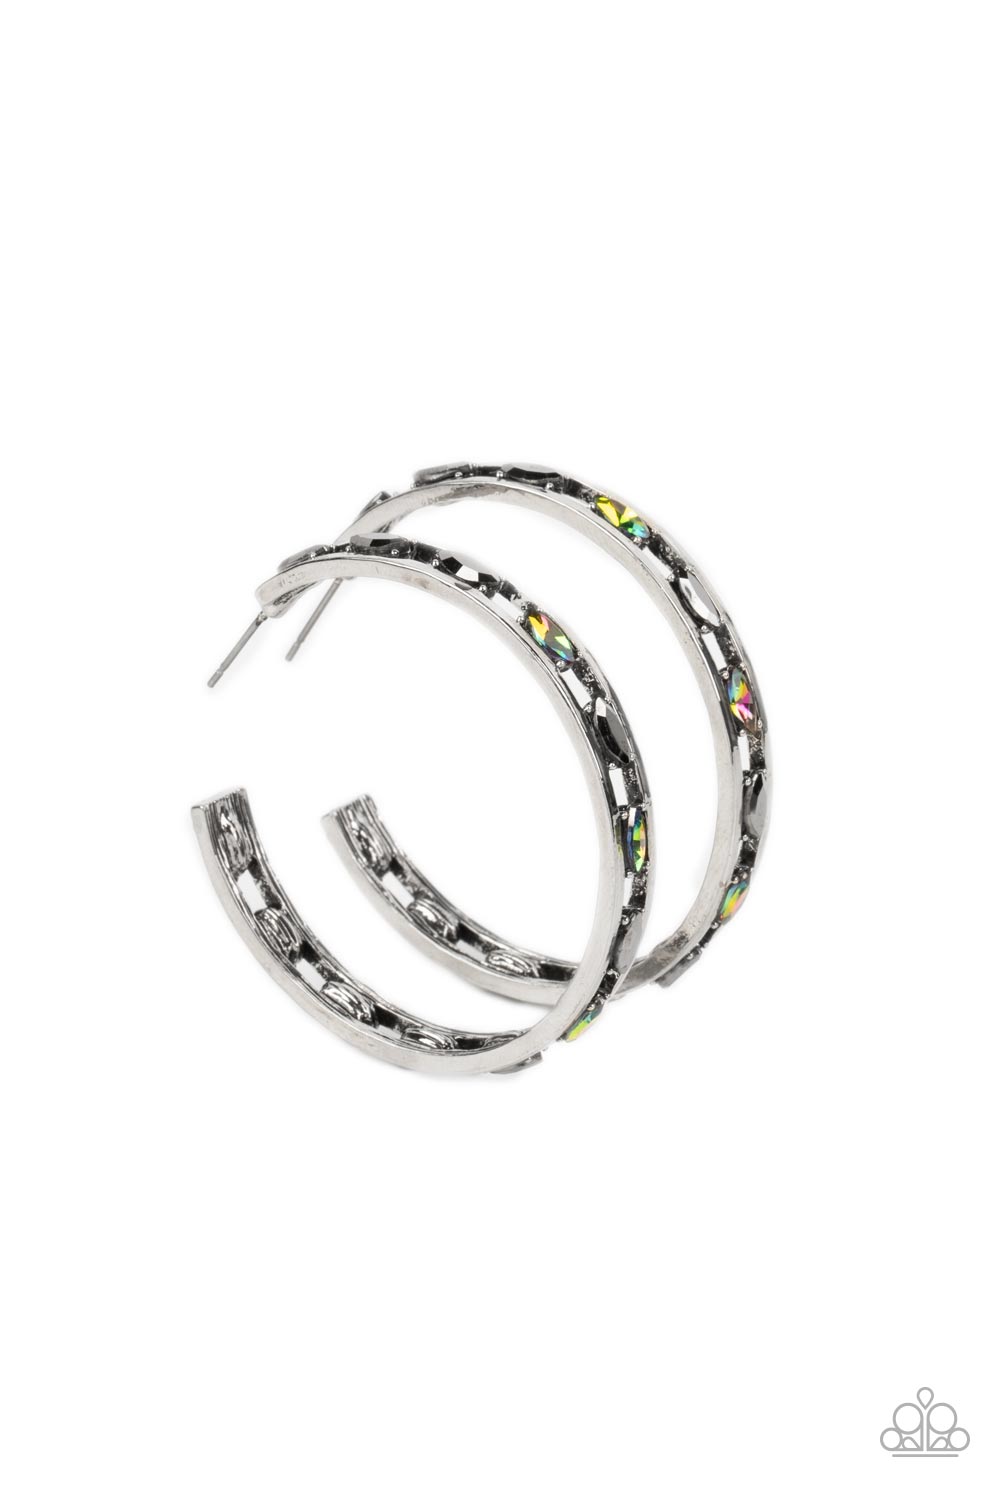 Paparazzi Accessories The Gem Fairy - Multi Dainty marquise-cut gems in hematite and oil spill finishes fall in line between two bars of silver, creating an airy hoop as they curl around the ear. Earring attaches to a standard post fitting. Hoop measures